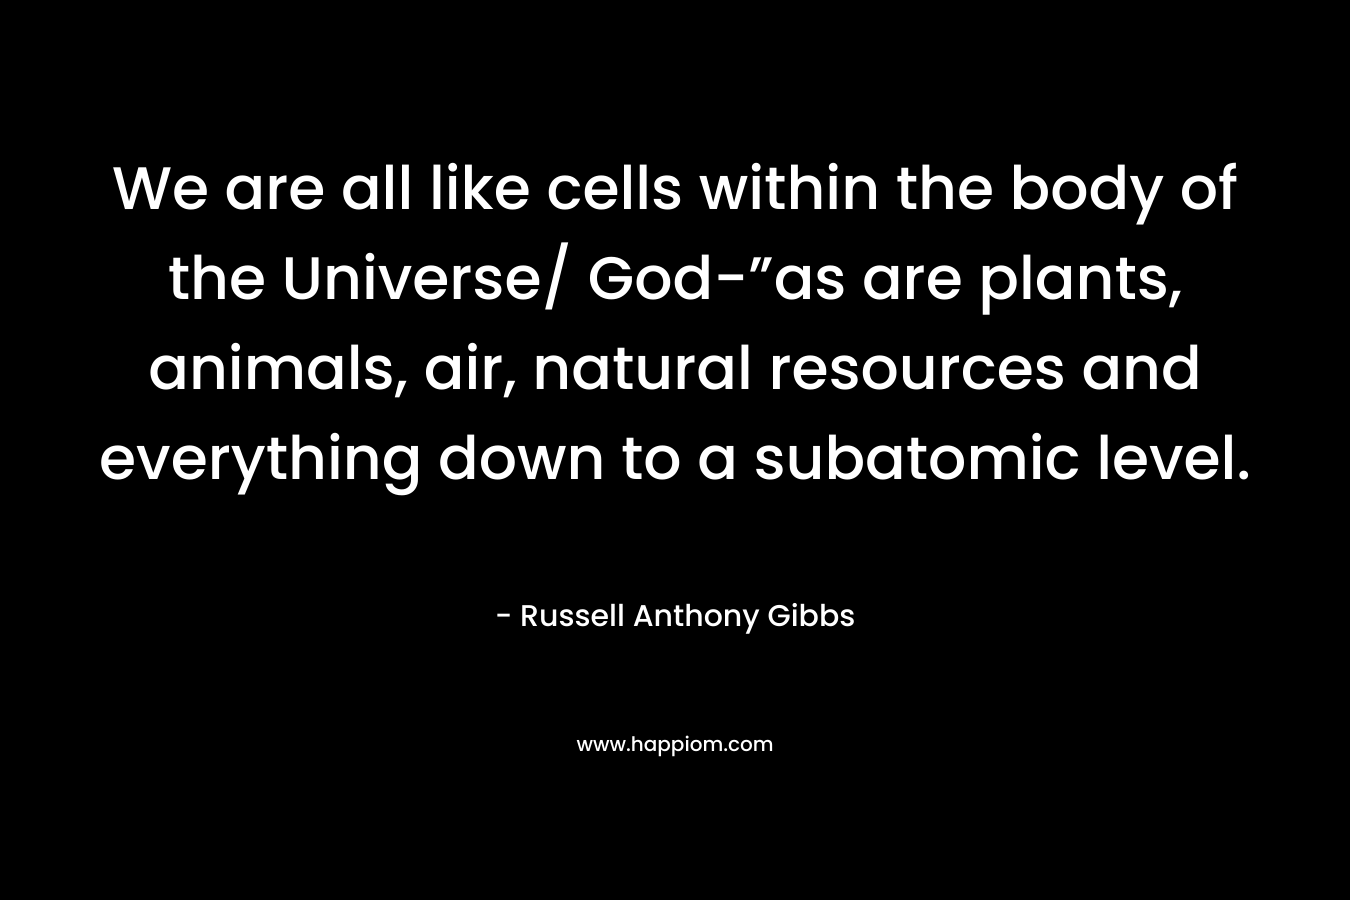 We are all like cells within the body of the Universe/ God-”as are plants, animals, air, natural resources and everything down to a subatomic level. – Russell Anthony Gibbs